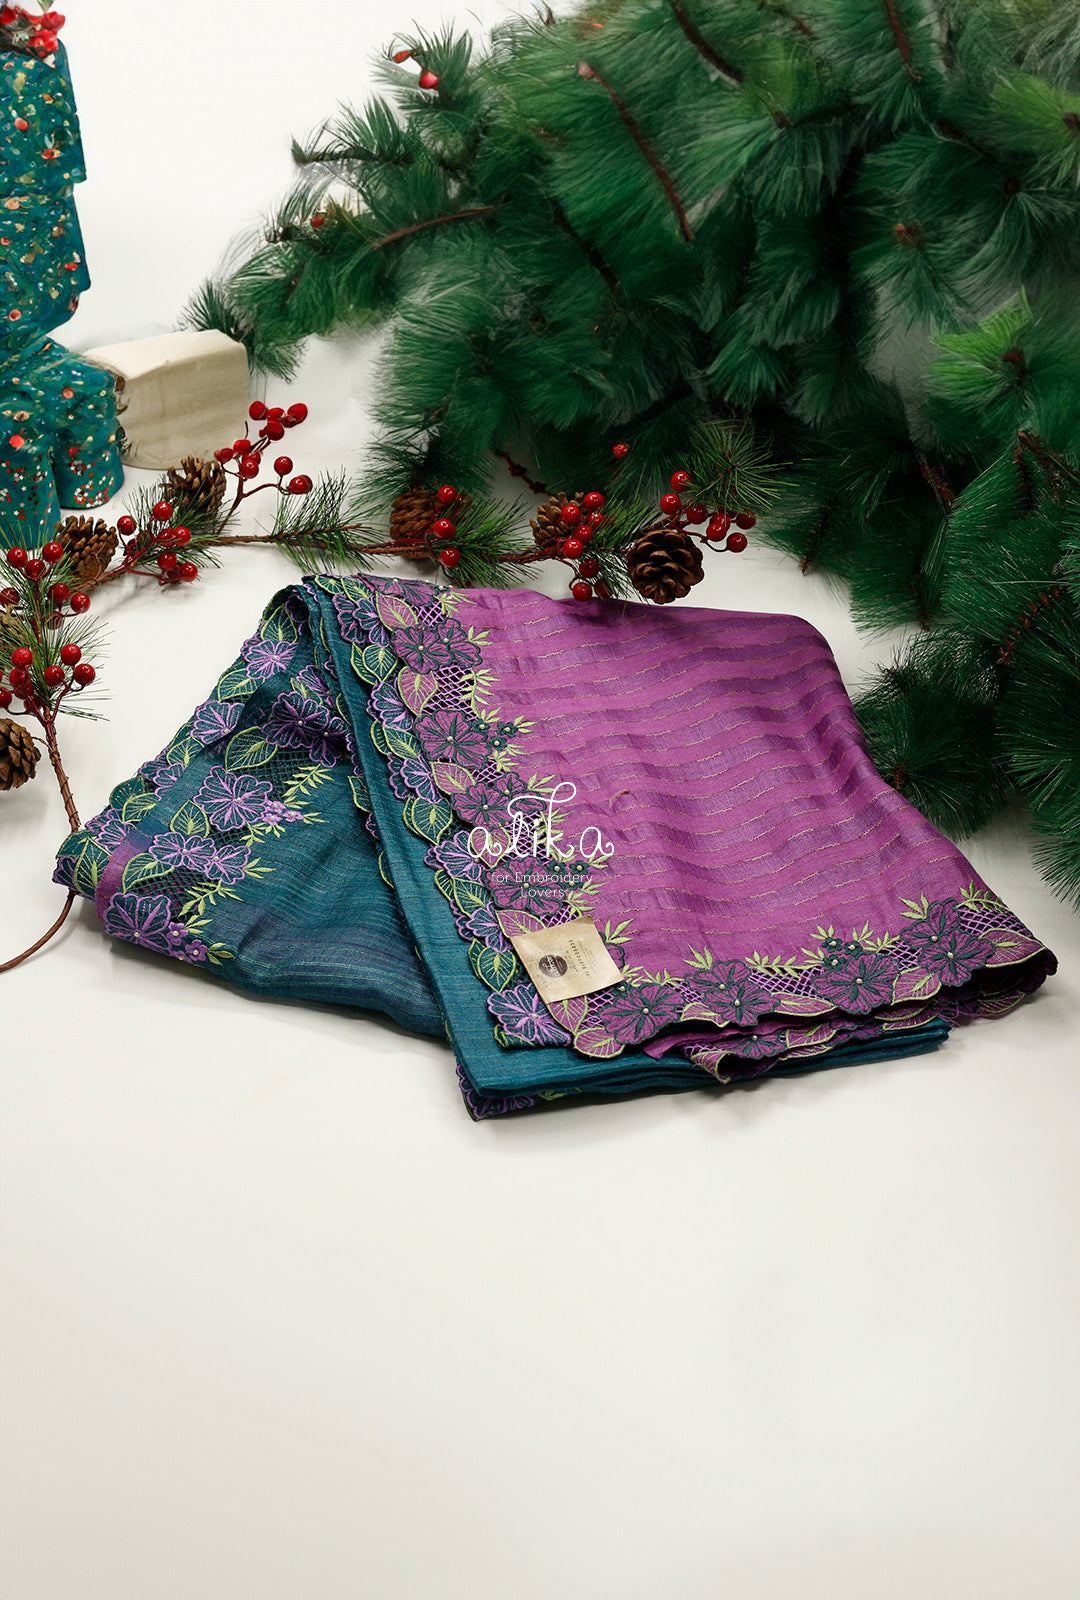 Elegance Redefined: Tussar Silk Saree with Full Border Cutwork and Bead Work